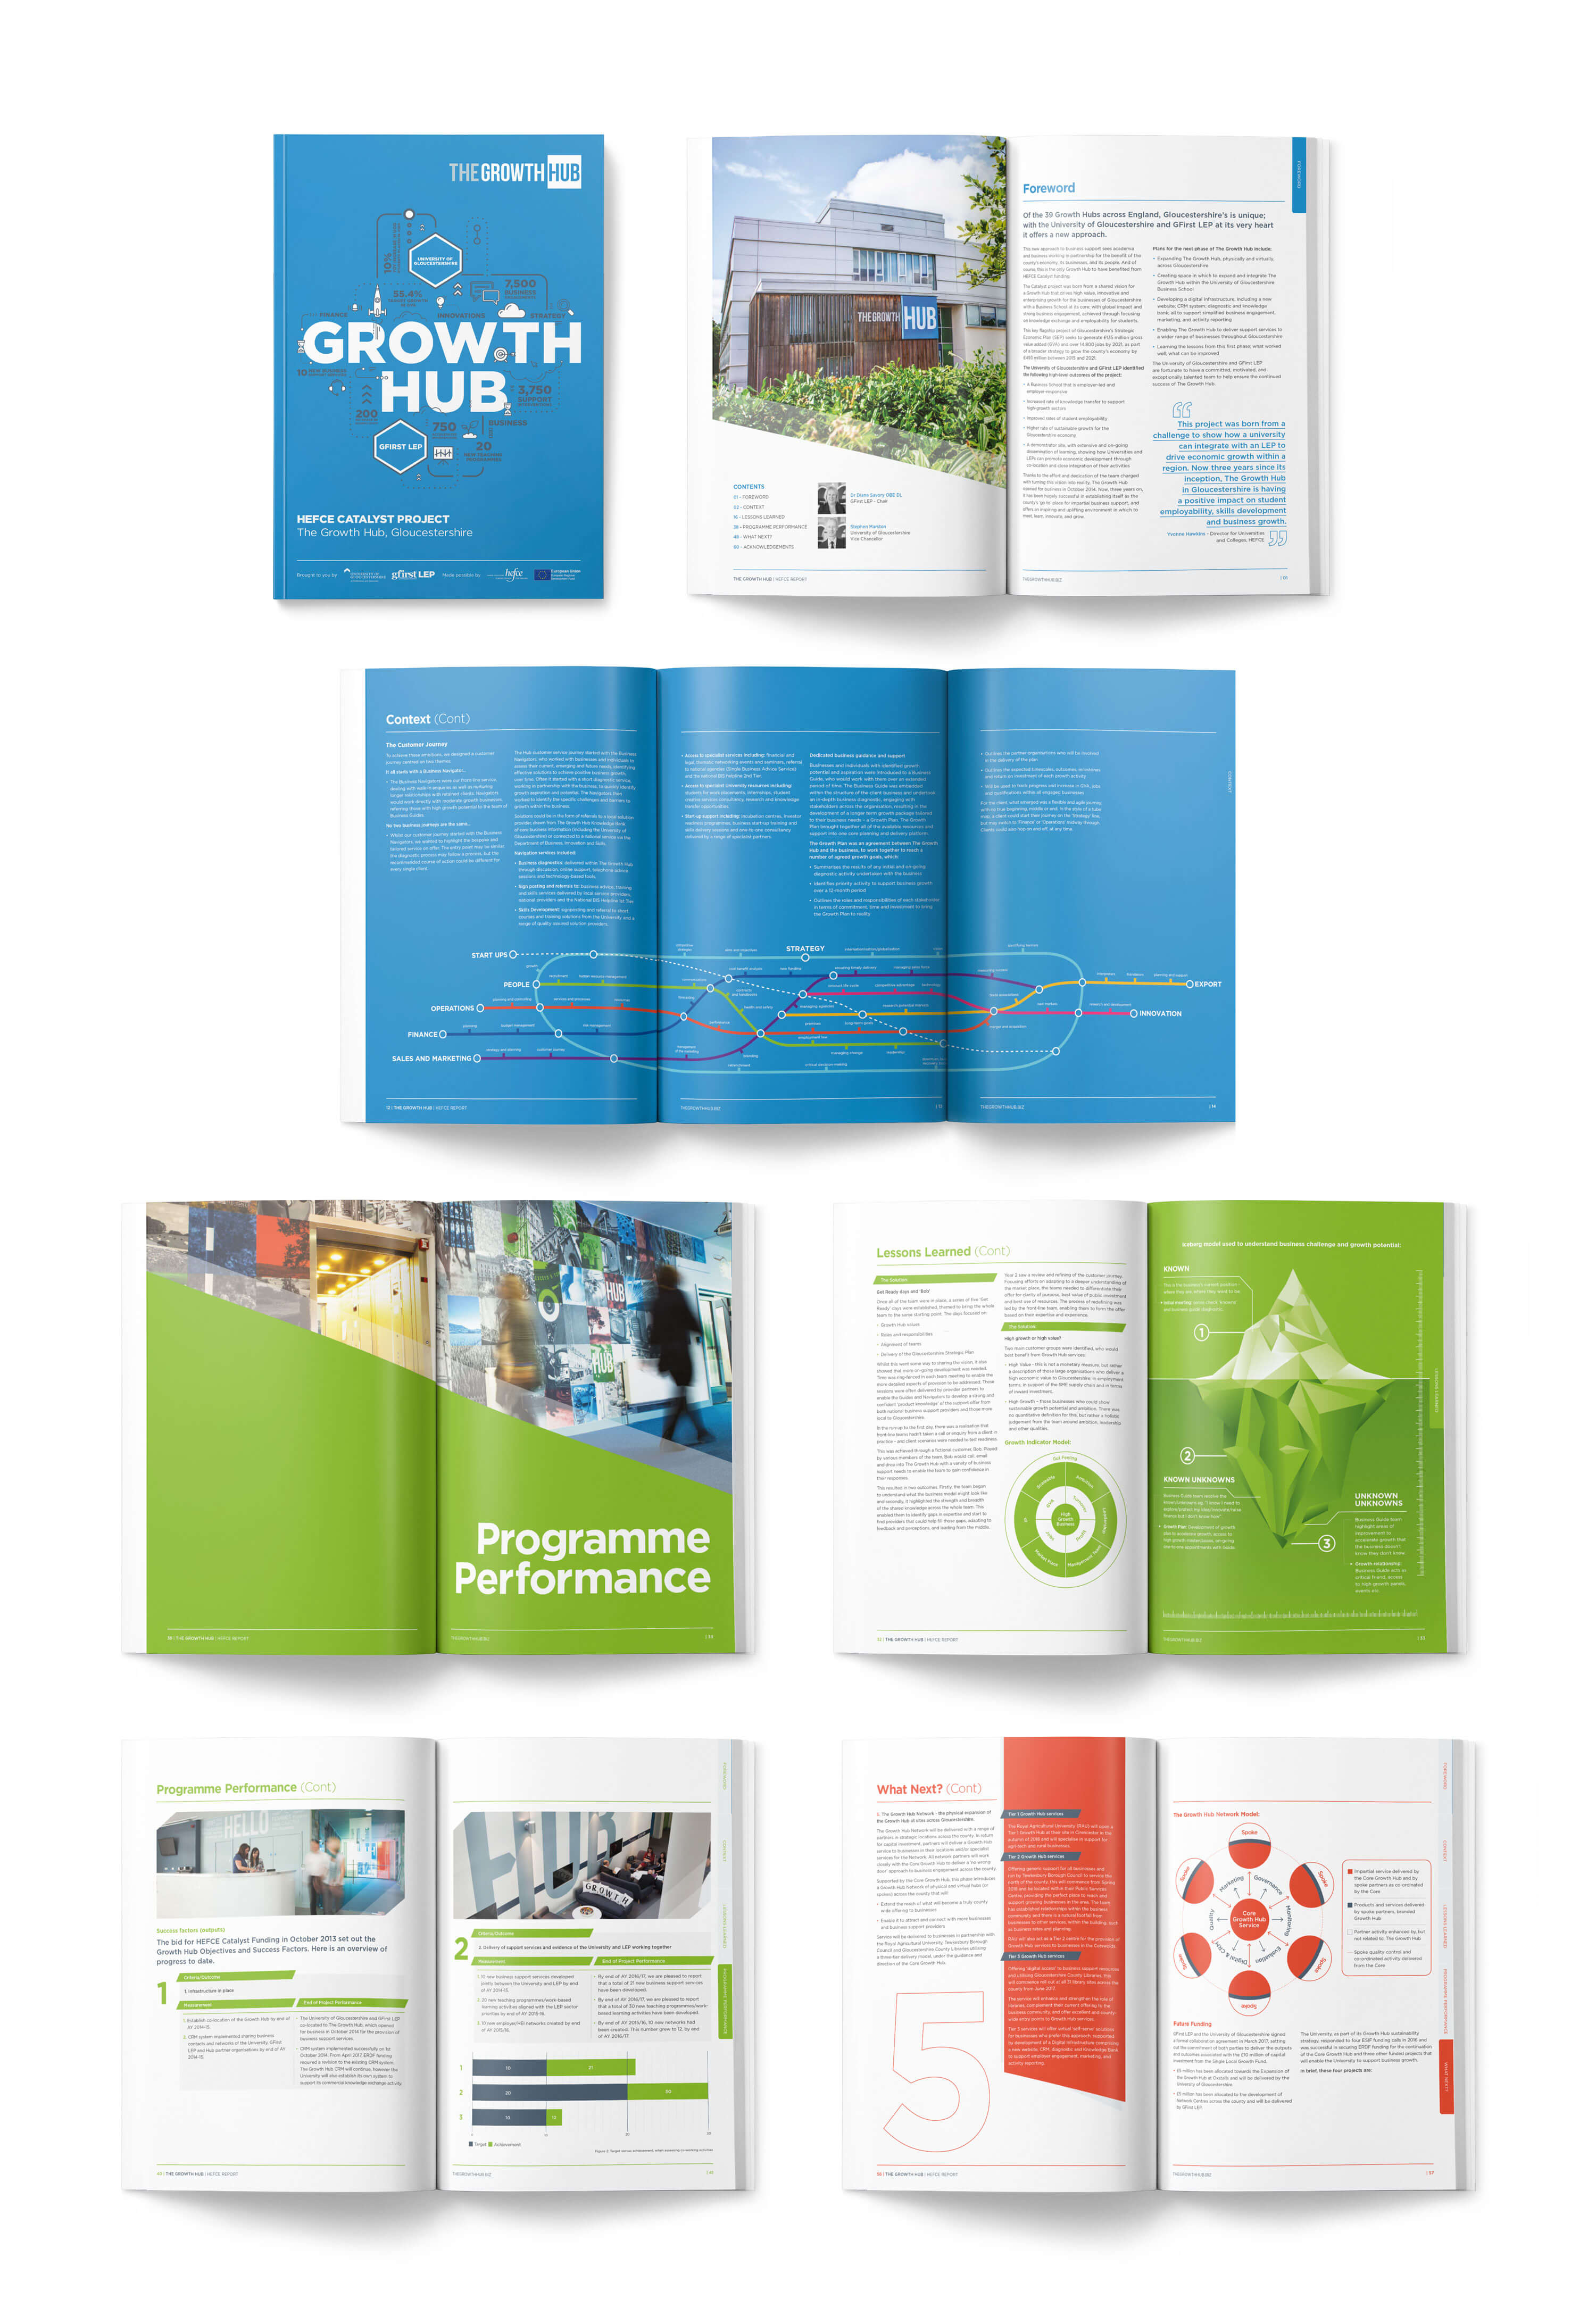 Editorial design for The Growth Hub by Mighty, design agency Gloucestershire